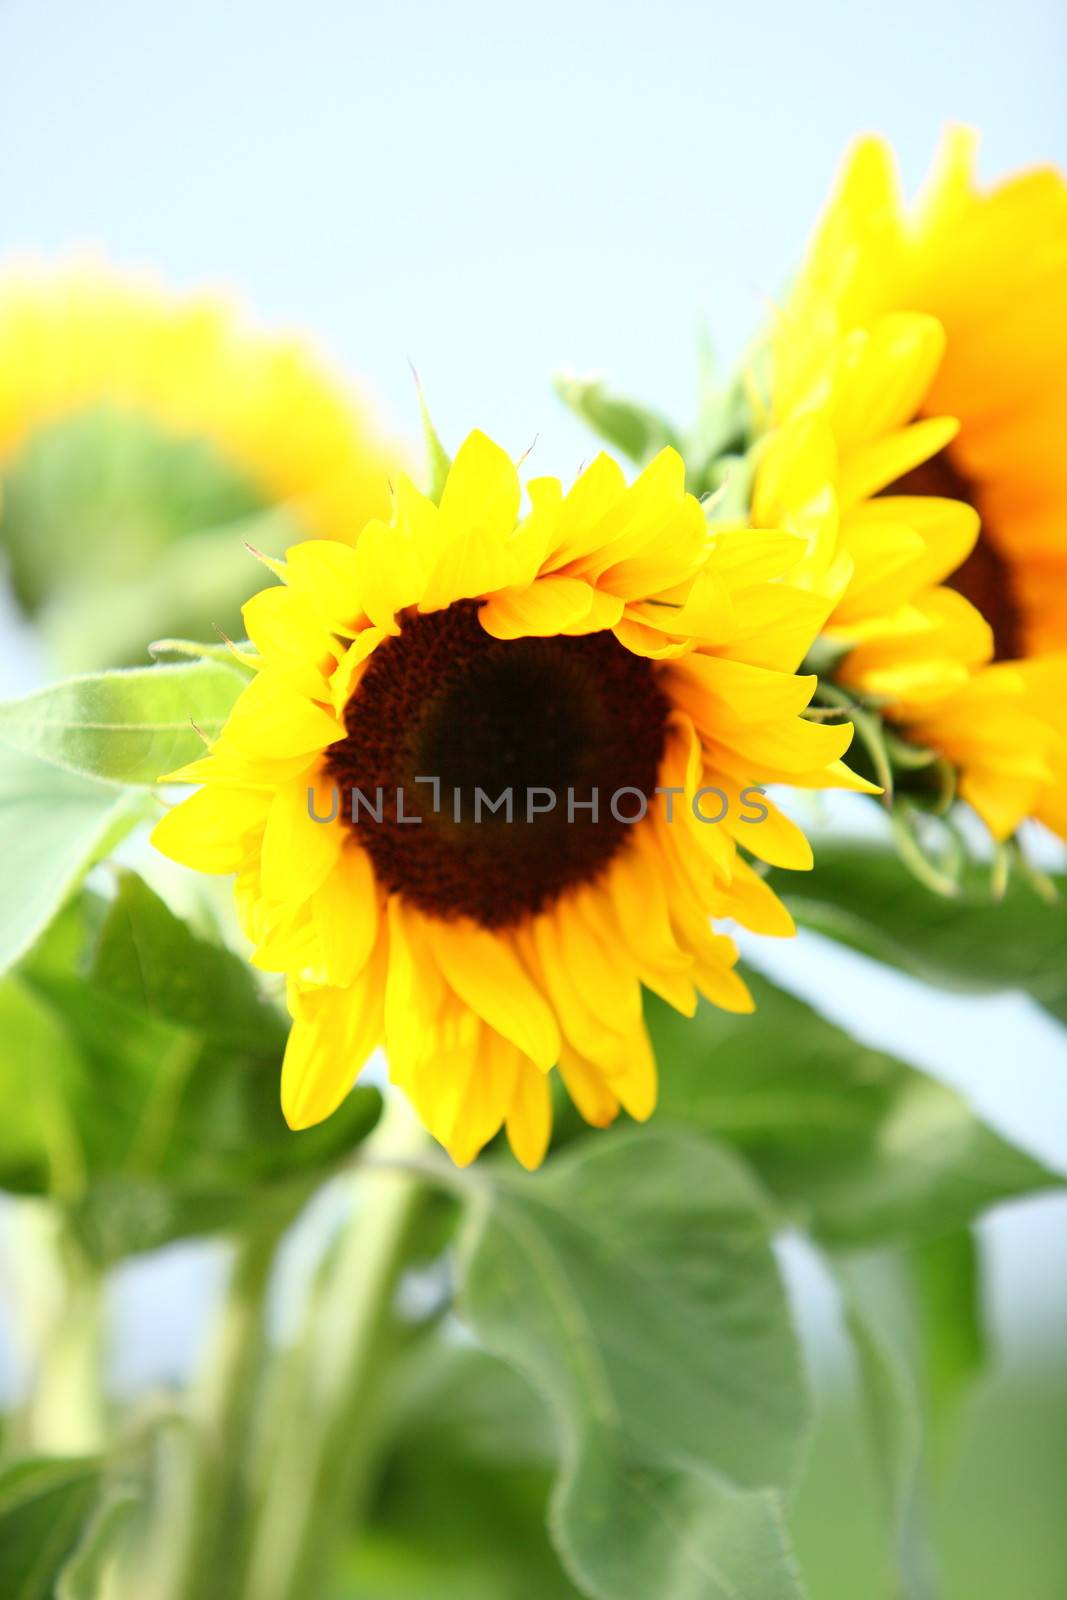 Colourful bright yellow sunflowers with their ripening seeds growing in a field outdoors